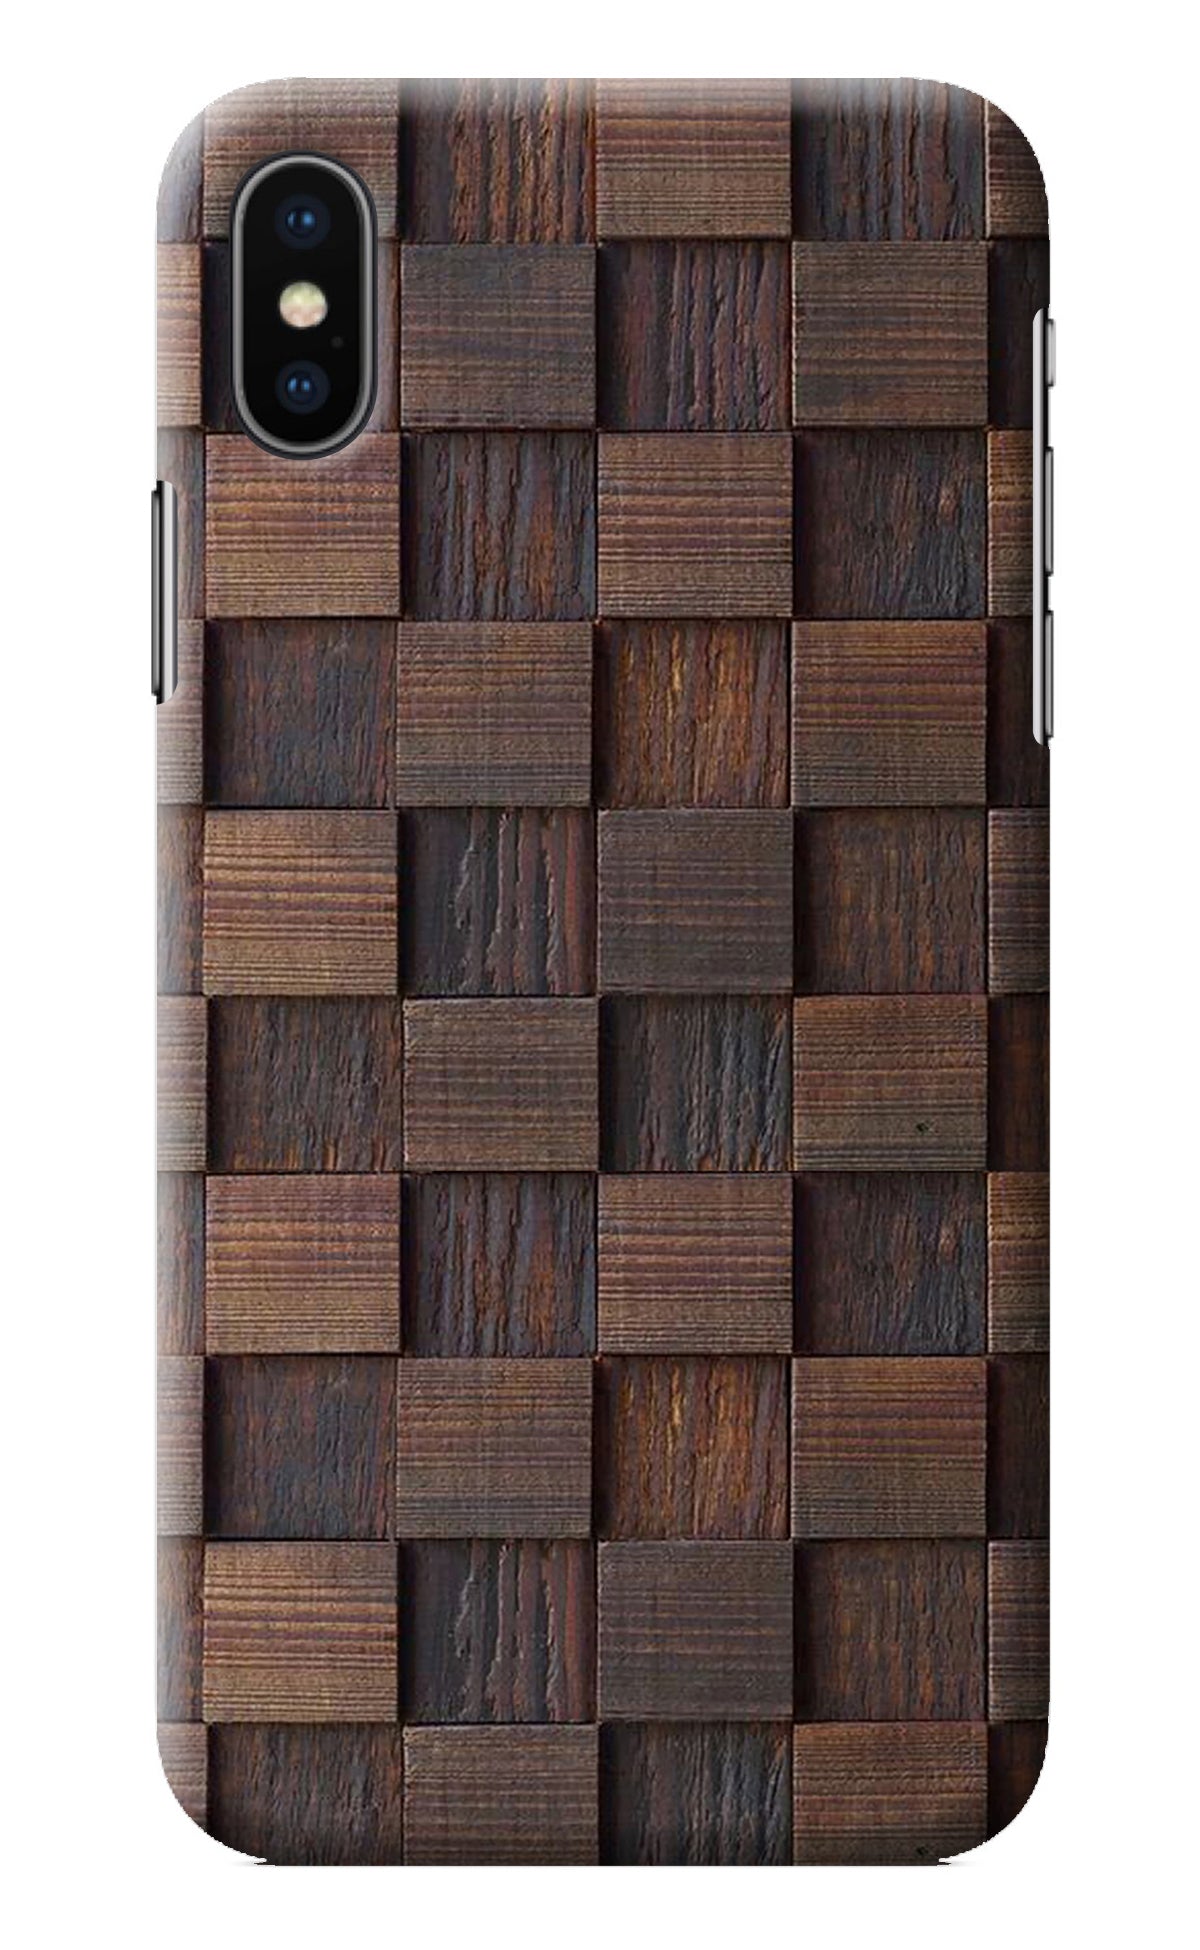 Wooden Cube Design iPhone X Back Cover